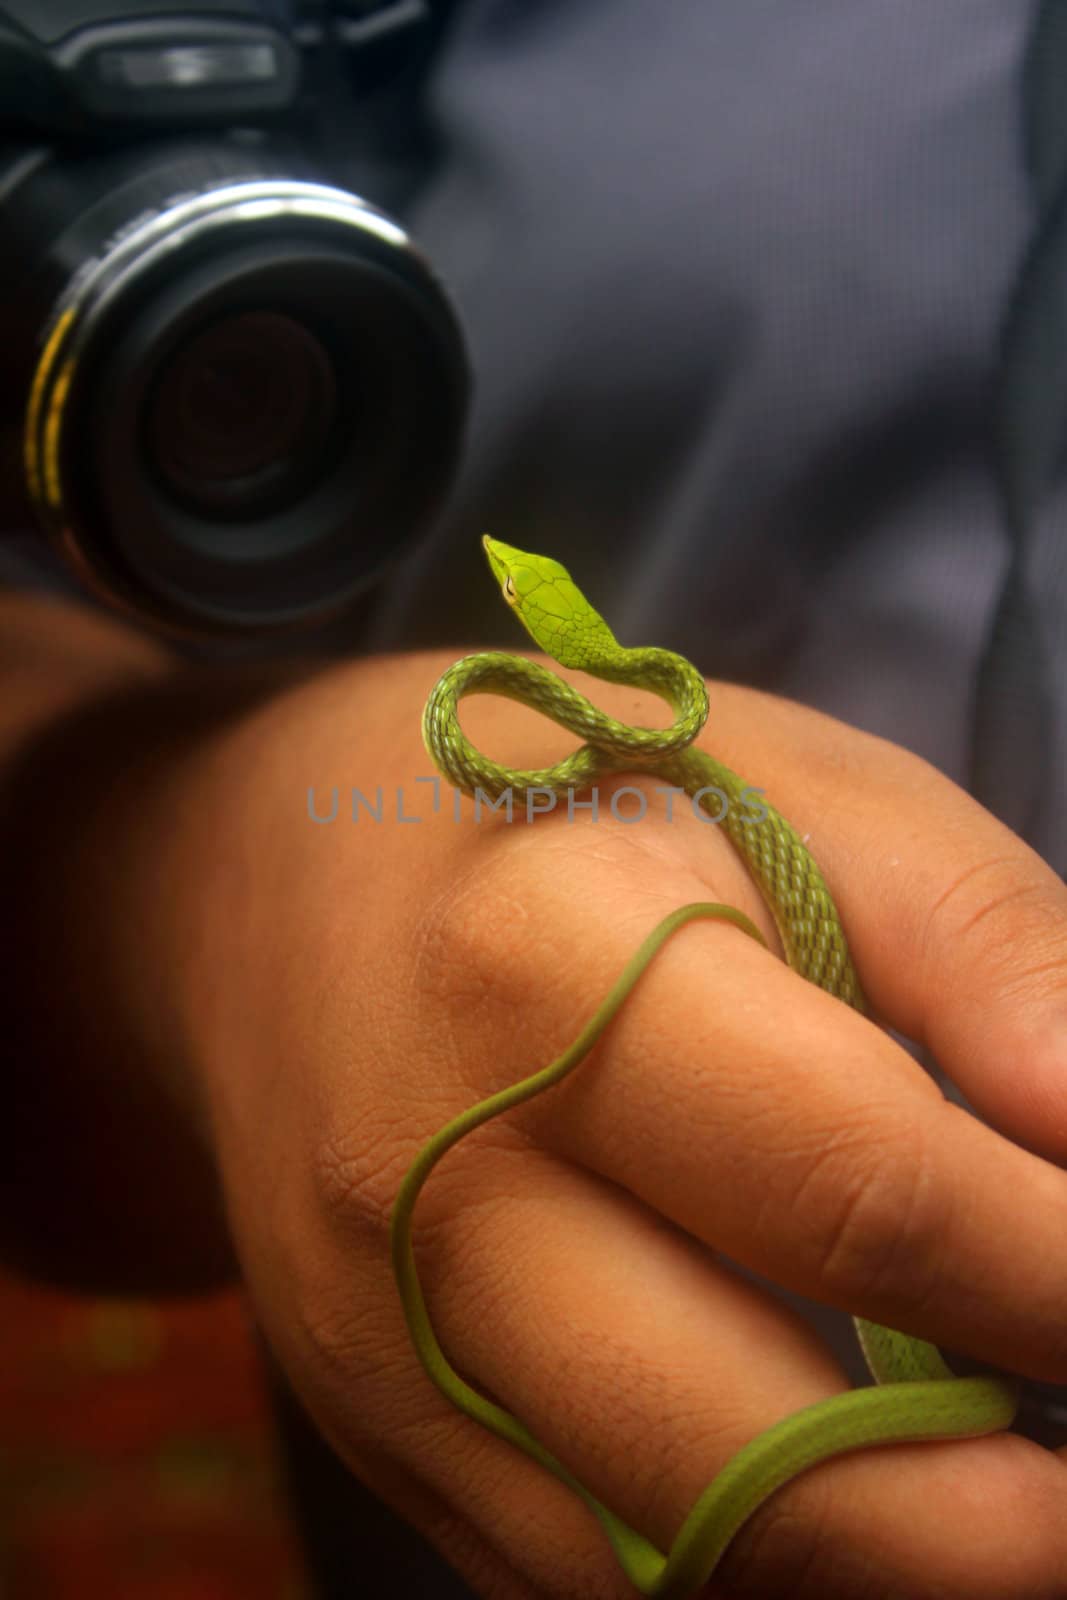 The lens of the camera of a wildlife photographer focussing on a green wine snake.